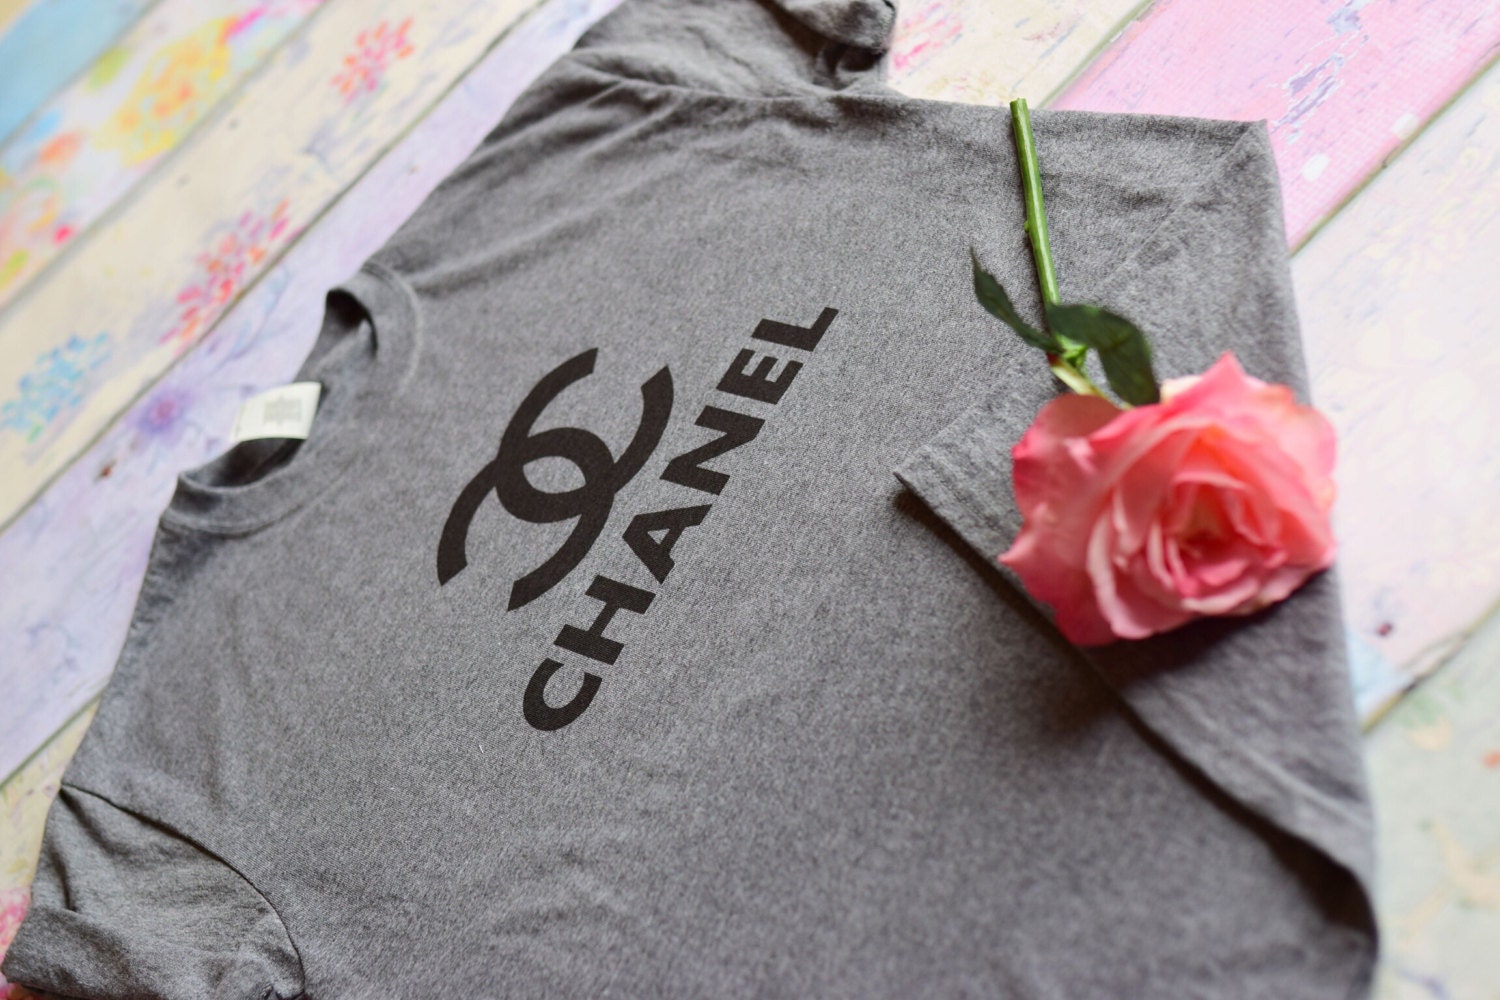 Chanel T shirt; Chanel Valentines; Valentine's Day T shirt; valentines gift for women; Valentines gift for wife; Mother's Day gift; FAVORITE